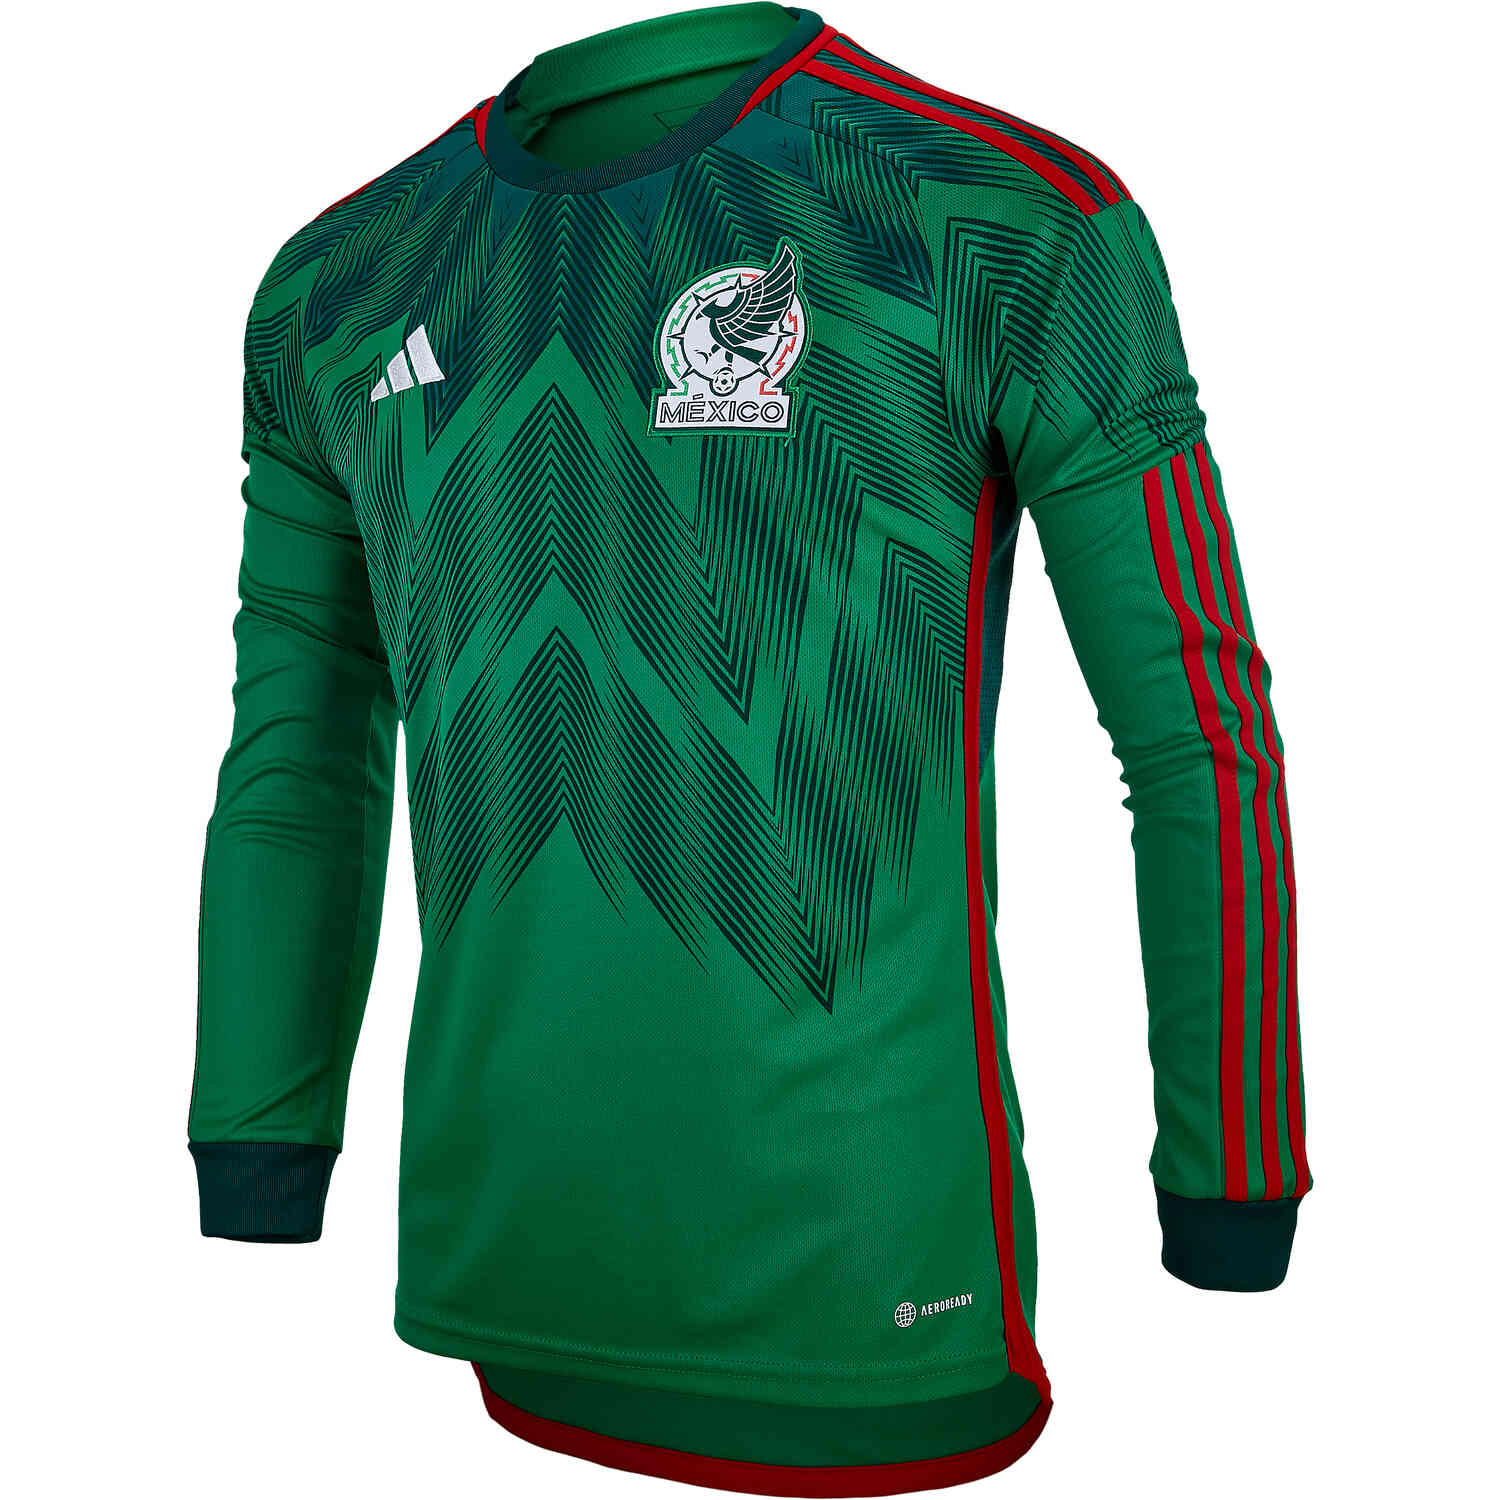 Adidas Mexico 22 Authentic Home Jersey S